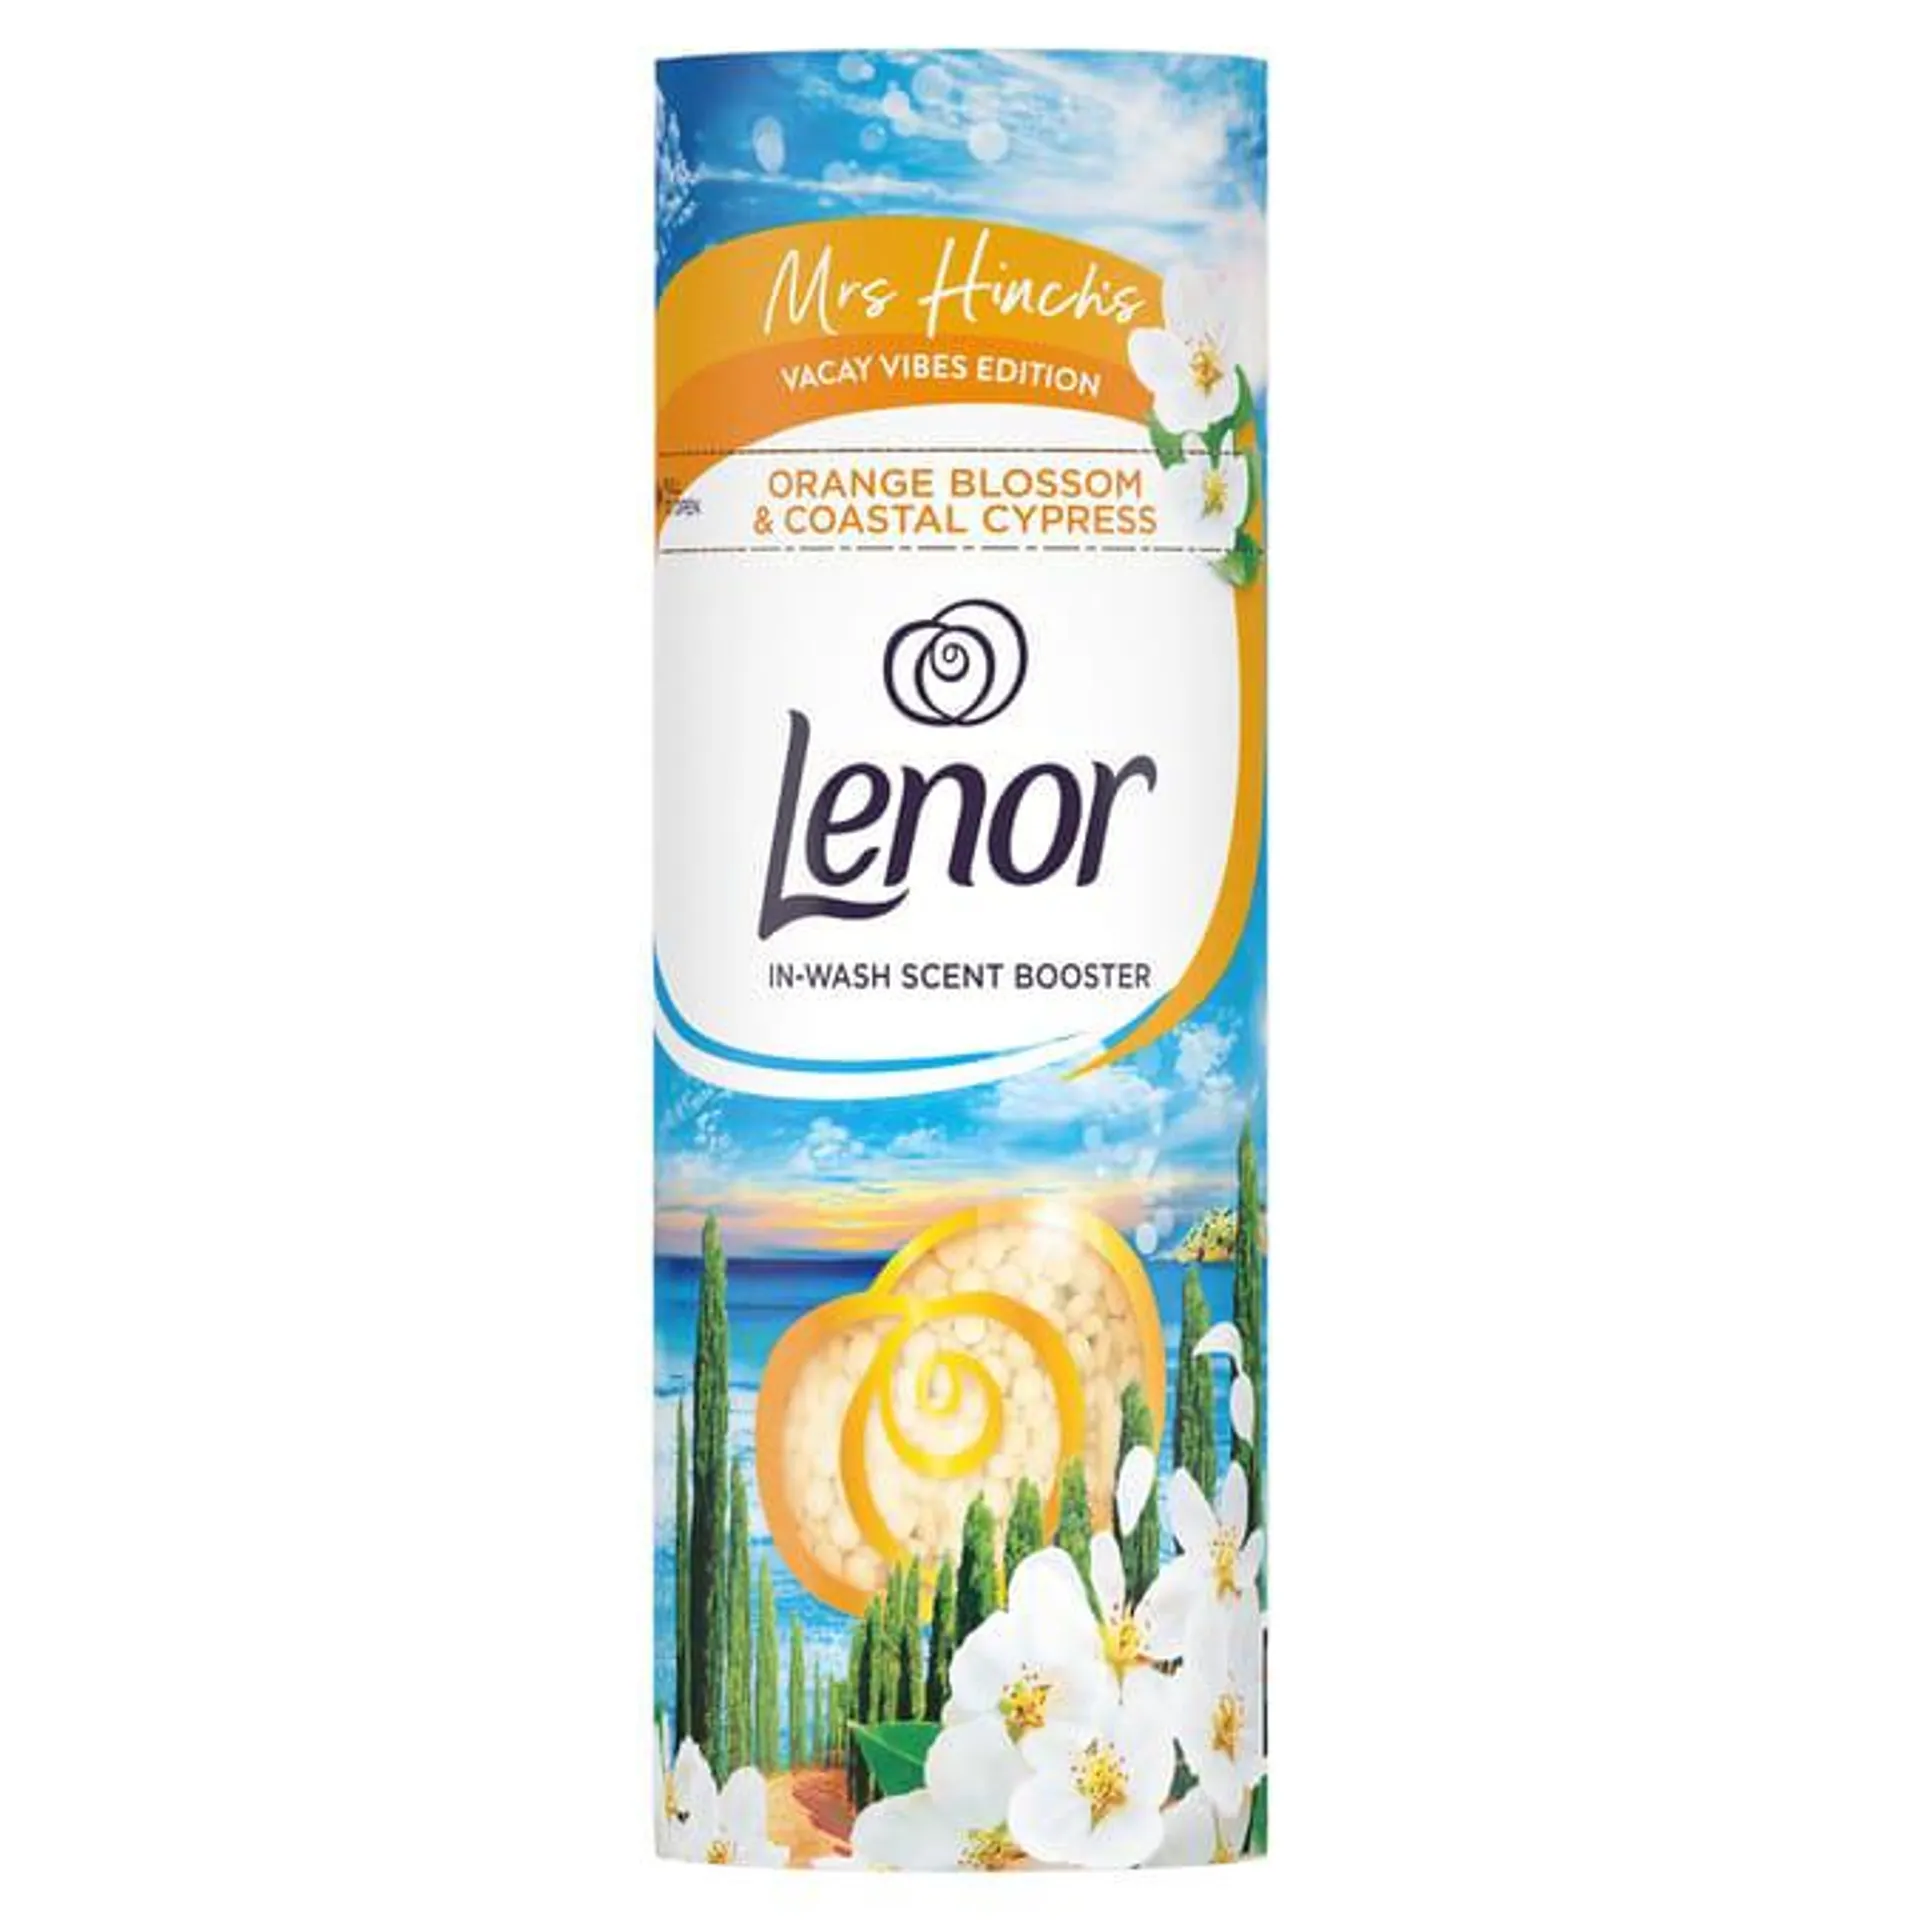 Lenor Mrs Hinch Vacay Vibes In-wash Scent Boosters 176g - Orange Blossom & Coastal Cypress